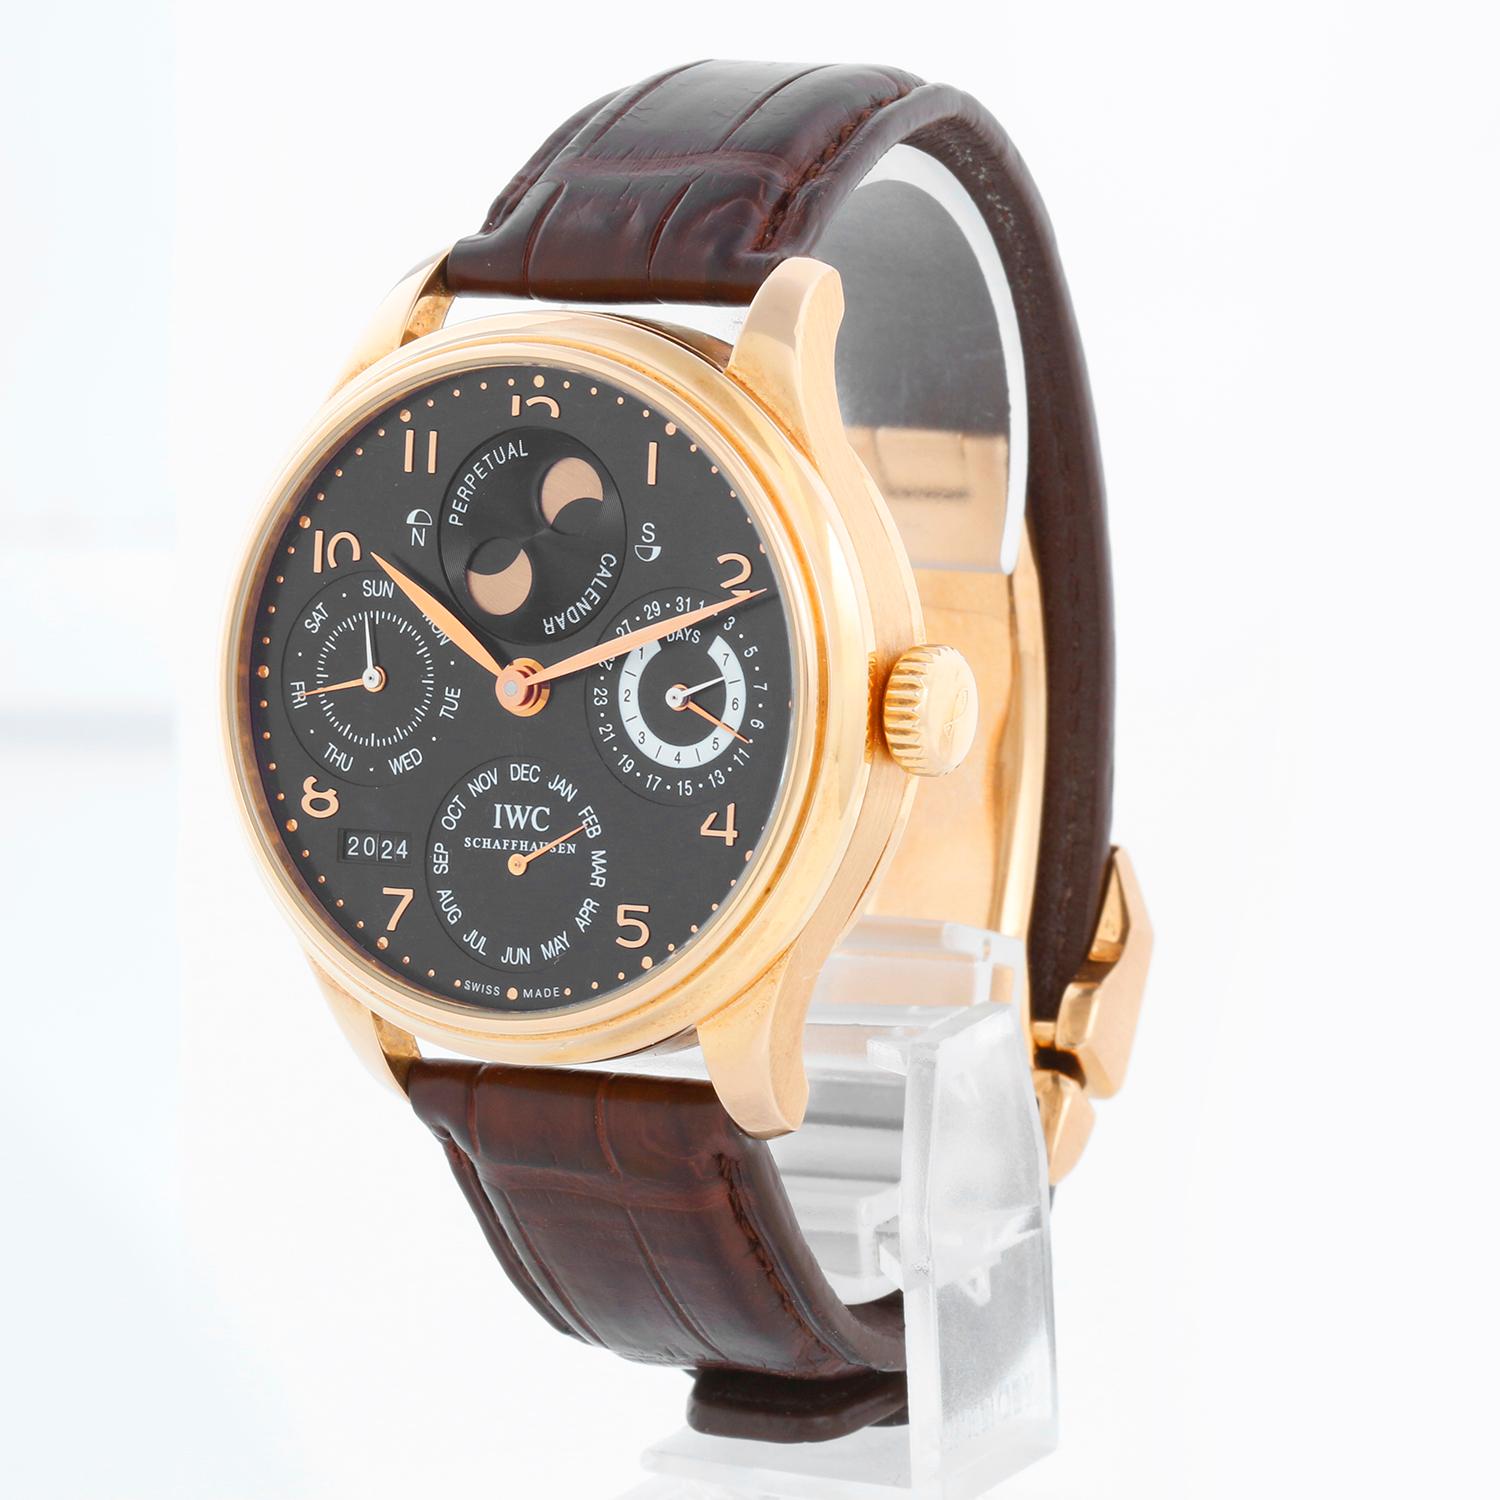 IWC Portuguese 7 Days Perpetual Calendar 18k Rose Gold Men's Complicated Watch IW503202 - Automatic winding; 62 jewels, 7 day power reserve. 18k rose gold case with exhibition back  (44mm diameter). Black dial with rose gold Arabic numerals; day